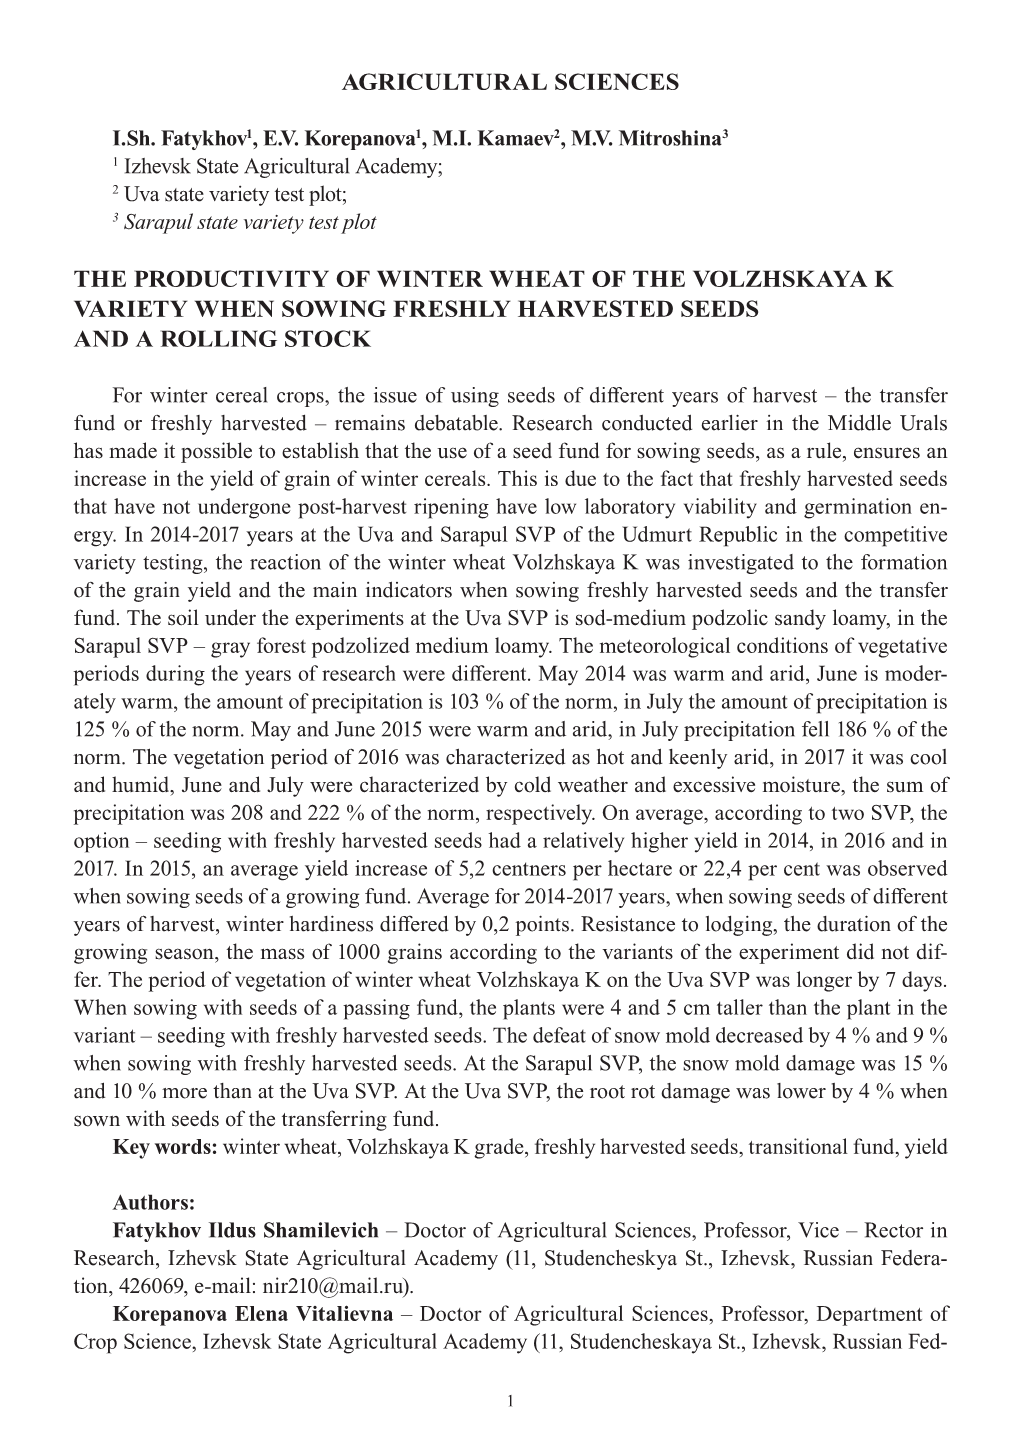 Agricultural Sciences the Productivity of Winter Wheat of the Volzhskaya K Variety When Sowing Freshly Harvested Seeds and a Ro